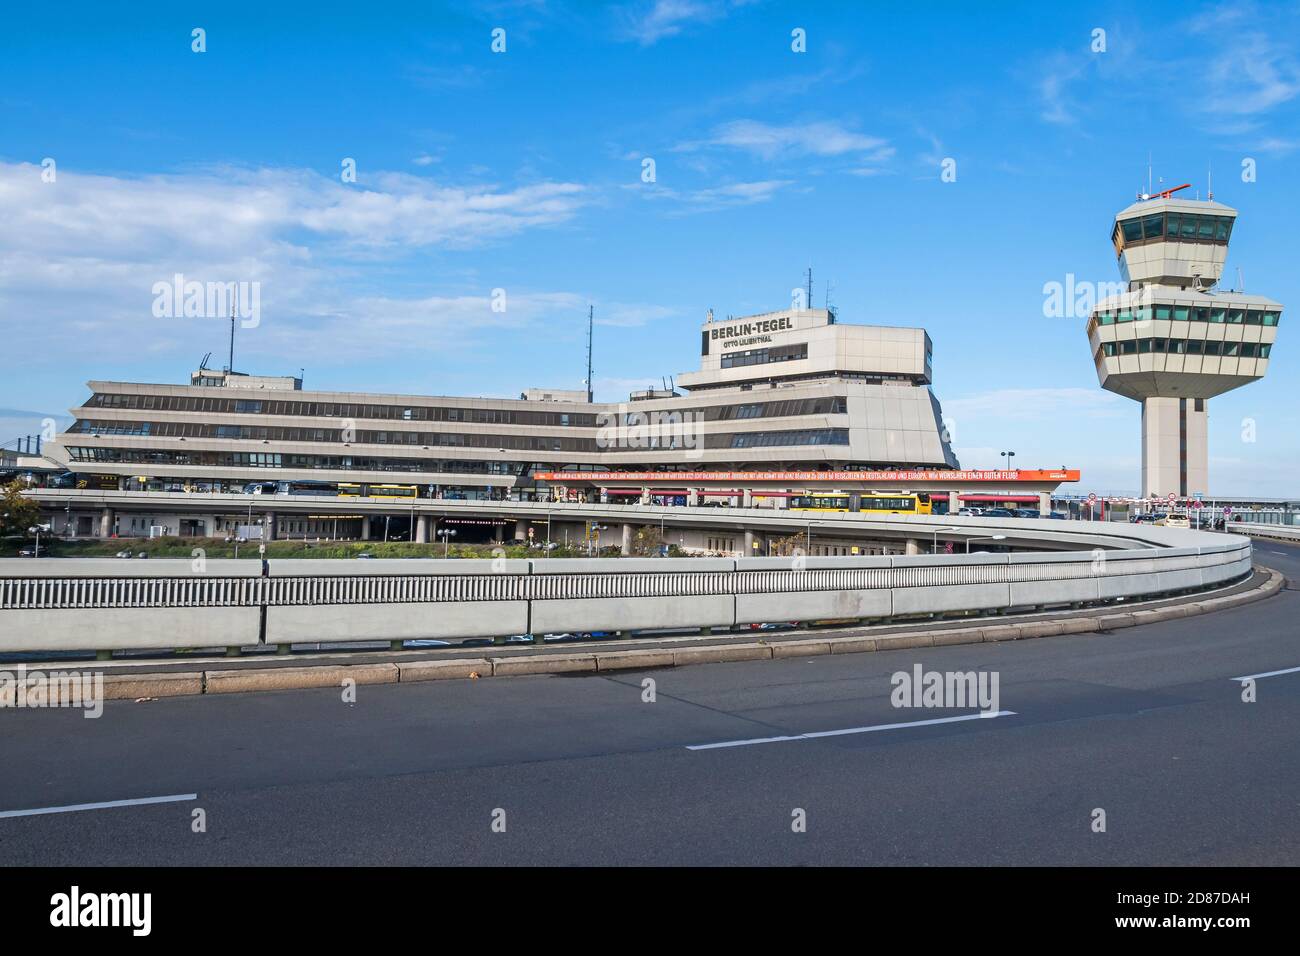 Berlin, Germany - October 22, 2020: Berlin-Tegel Otto Lilienthal main international airport with its terminal and control tower, which is due to perma Stock Photo